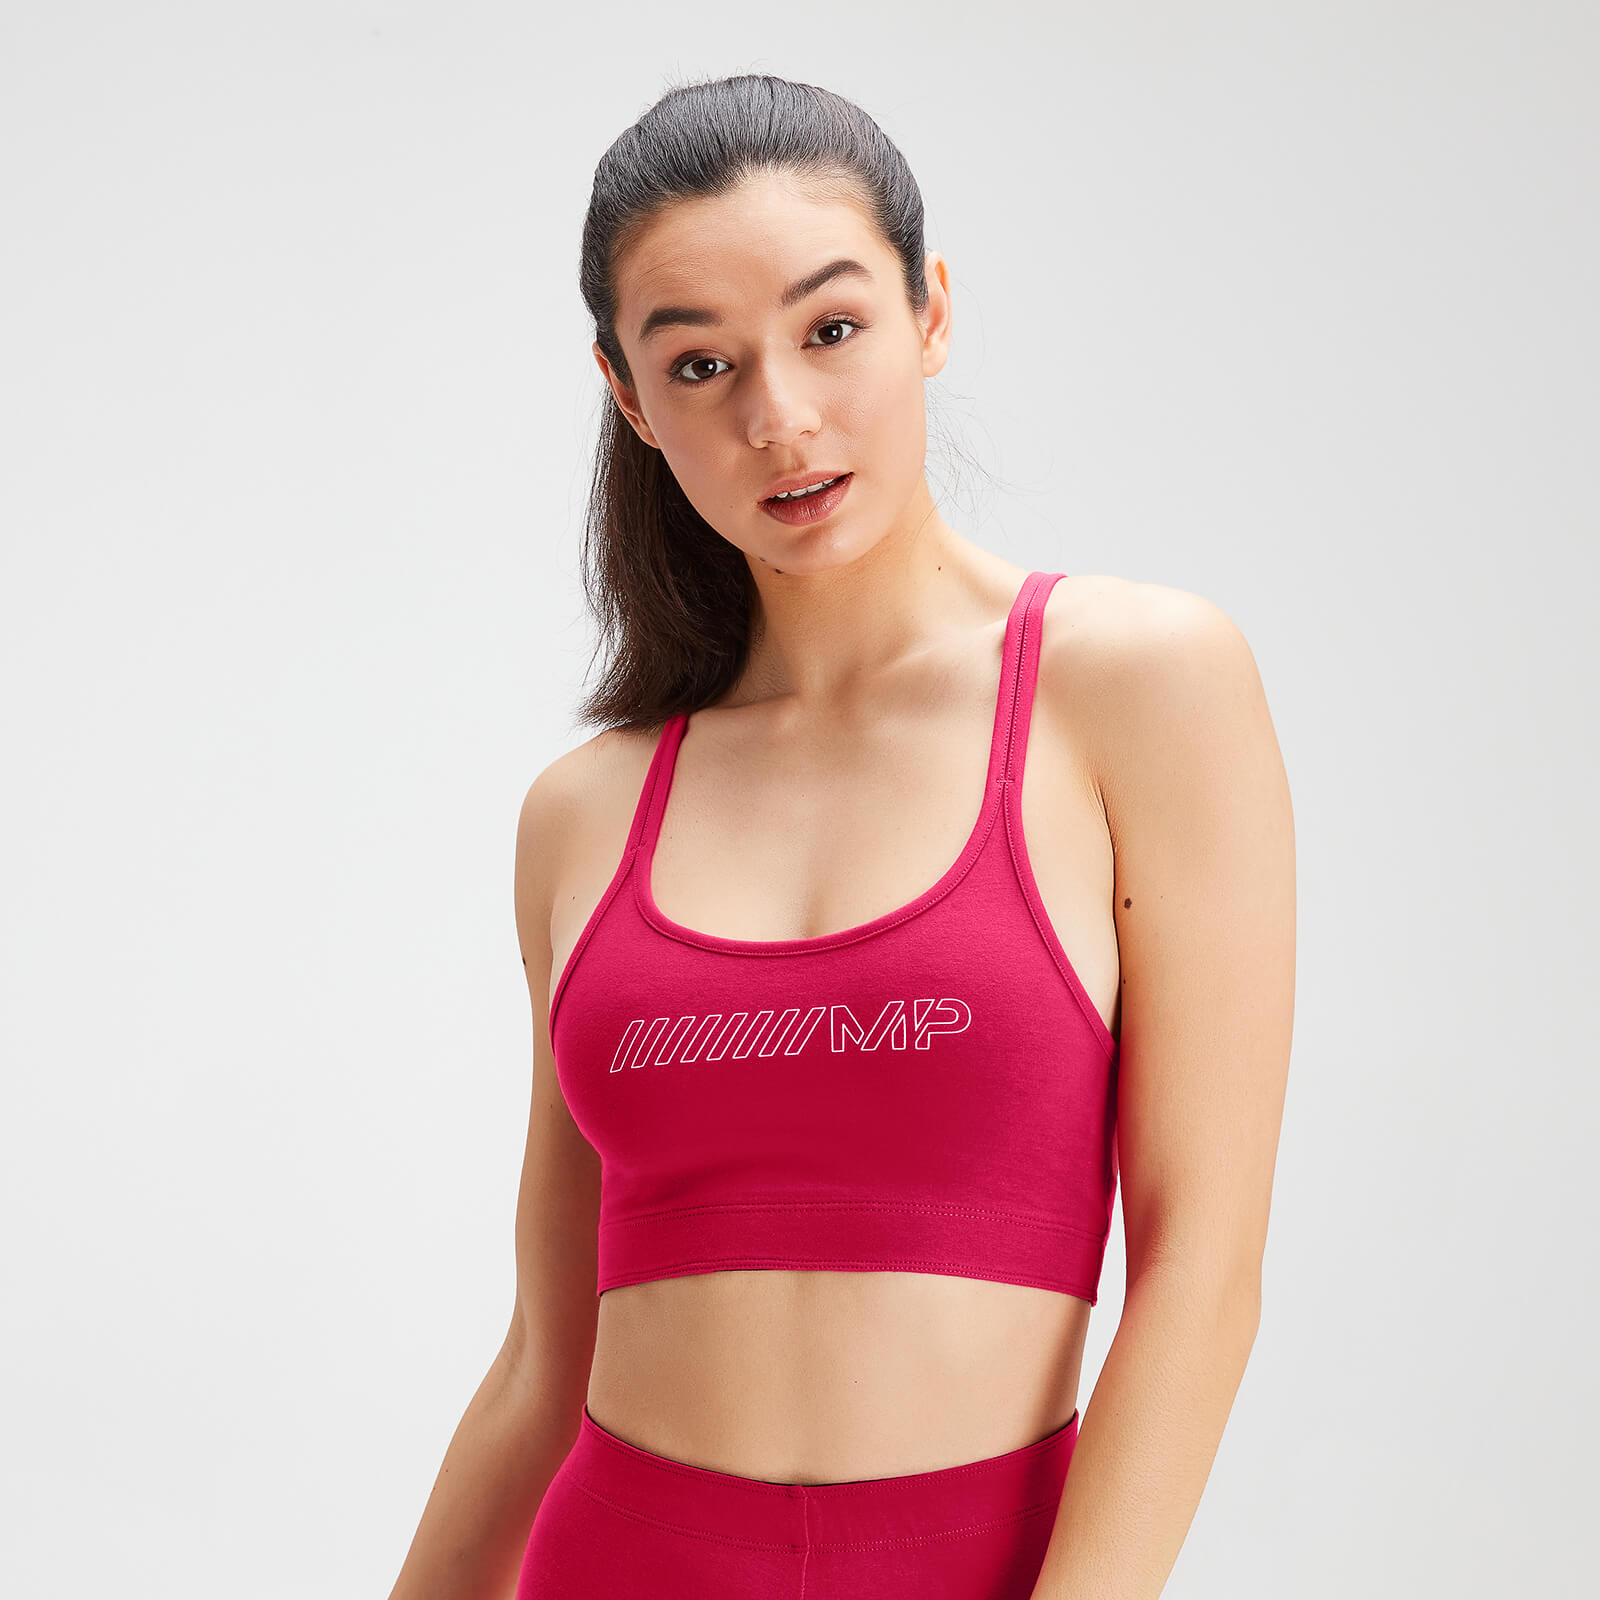 MP Women's Outline Graphic Bra - Virtual Pink - S